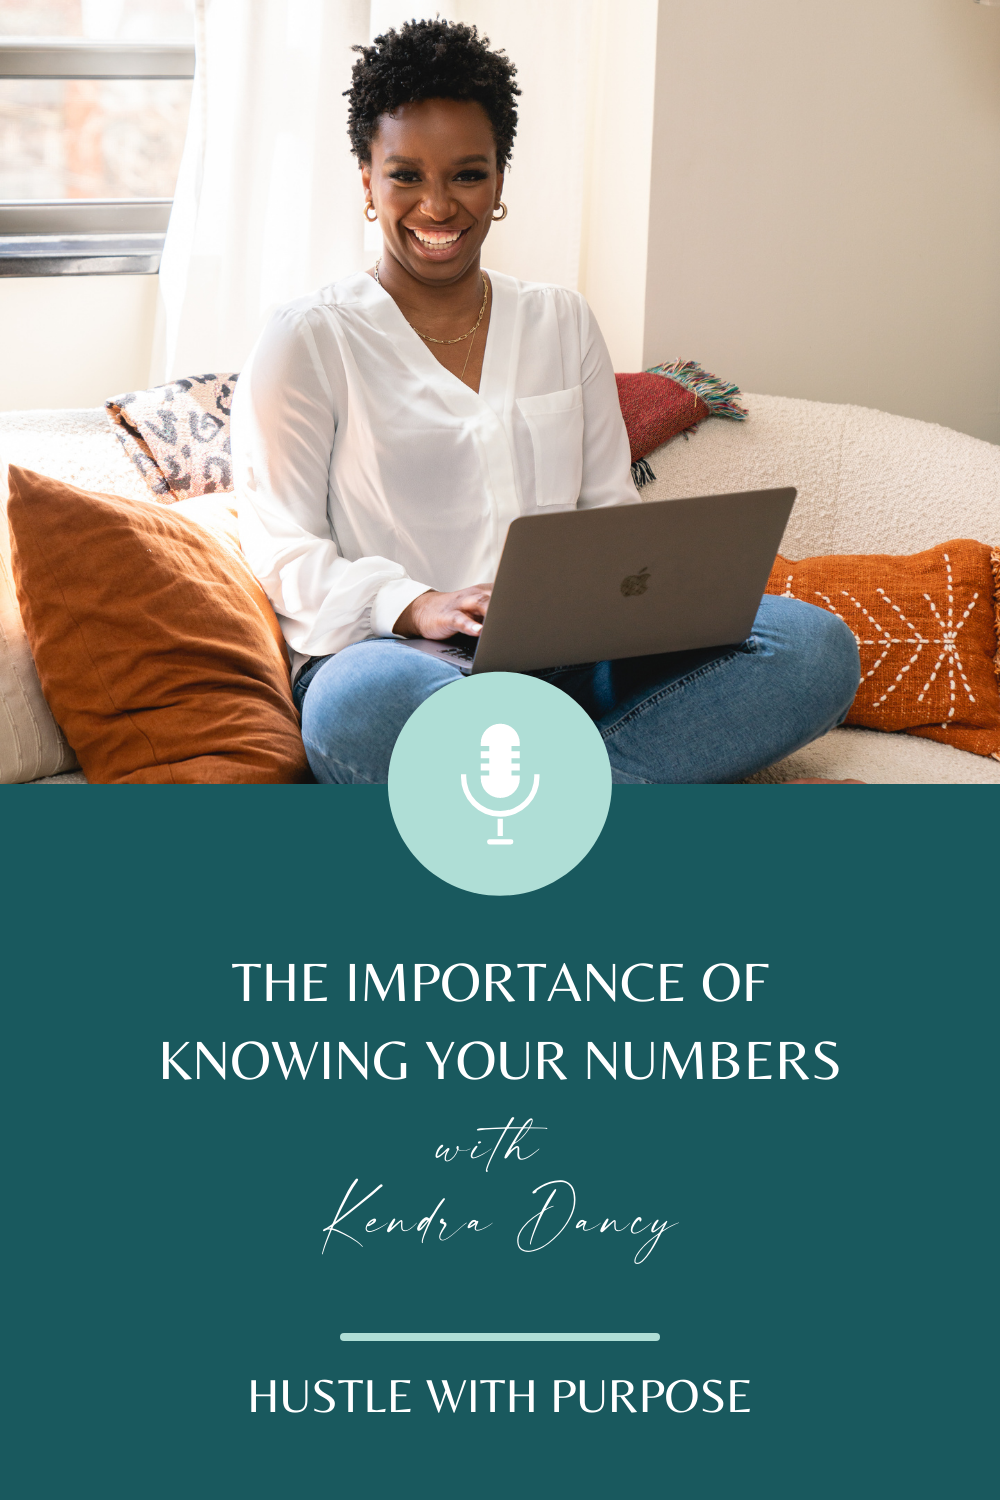 The Importance of Knowing Your Number with Kendra Dancy